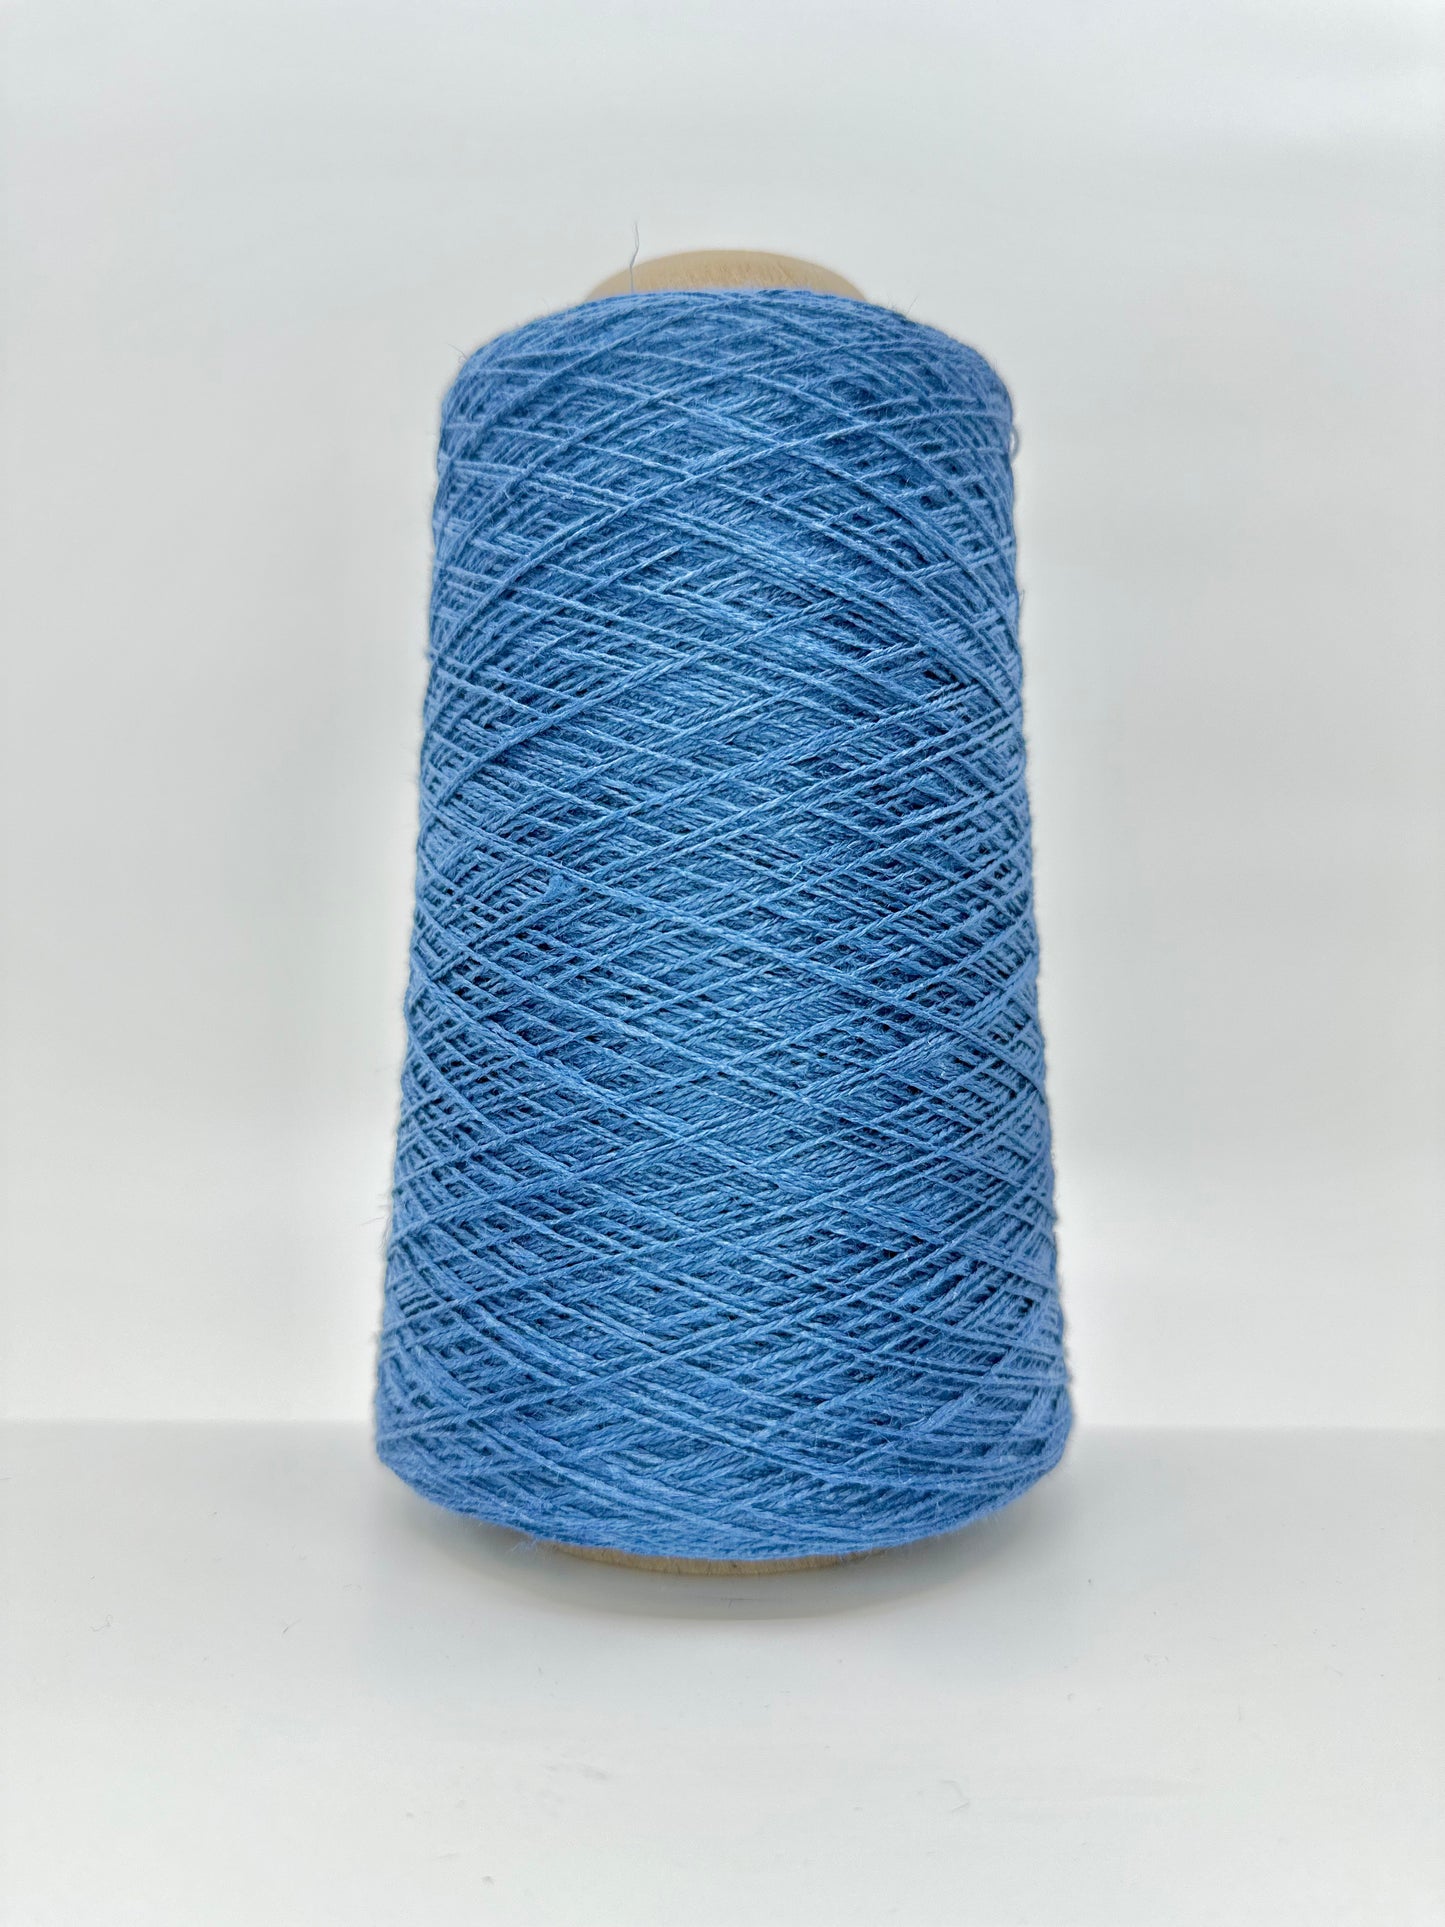 Euroflax 14/2 Linen - French Blue